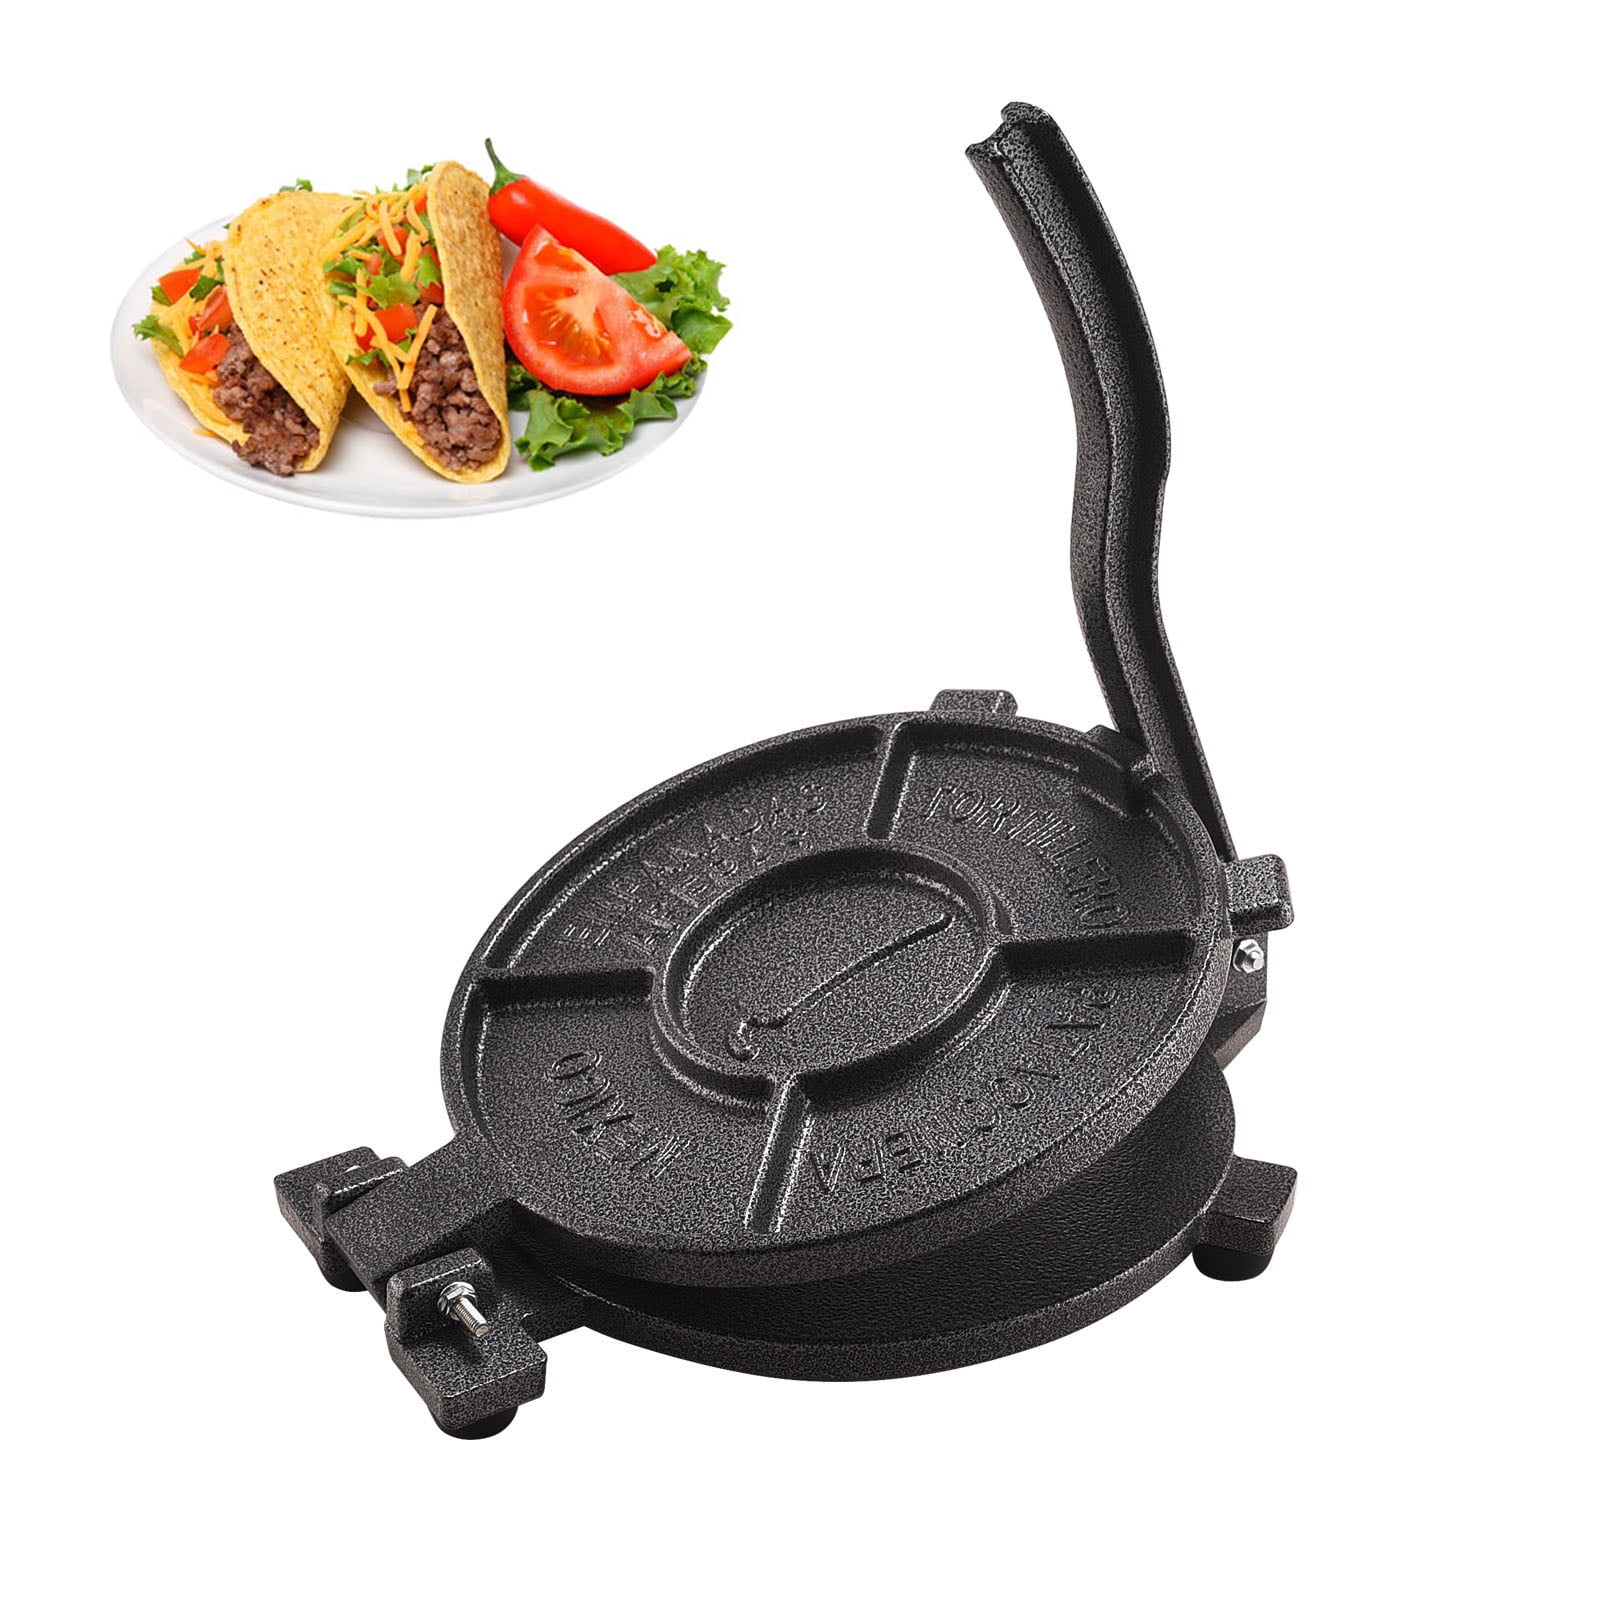 10 Inch Cast Iron Tortilla Press by StarBlue with Free 100 Pieces Oil Paper